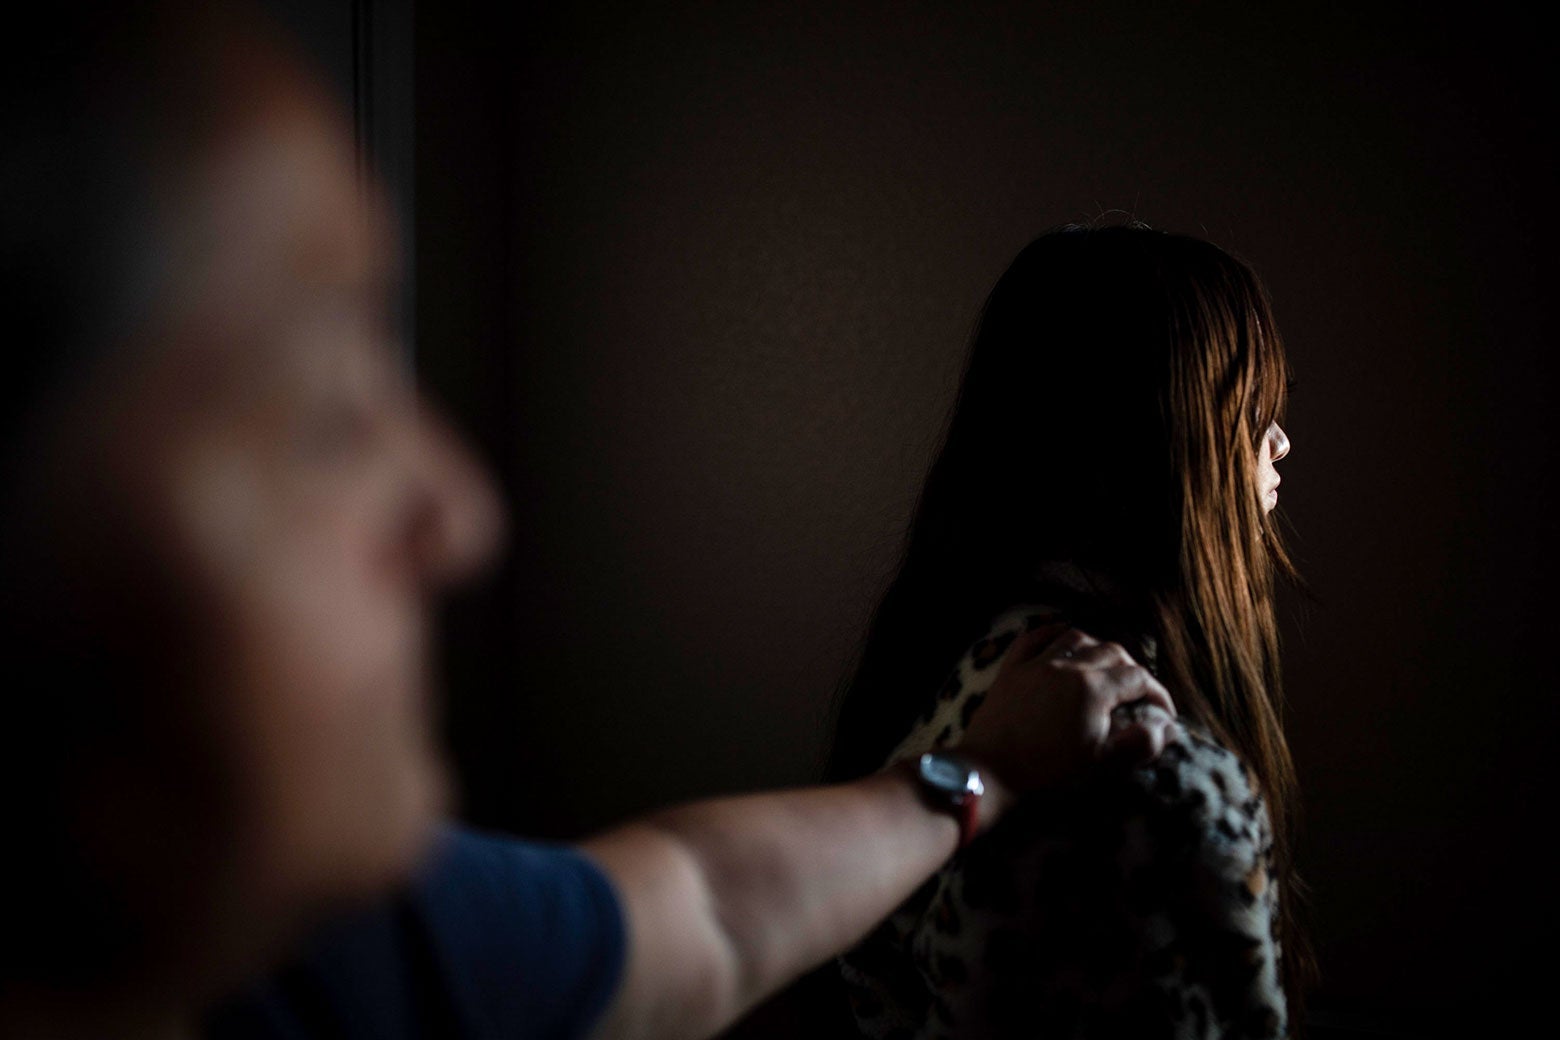 One Navajo girls story shows Americas failure to screen for sex trafficking.